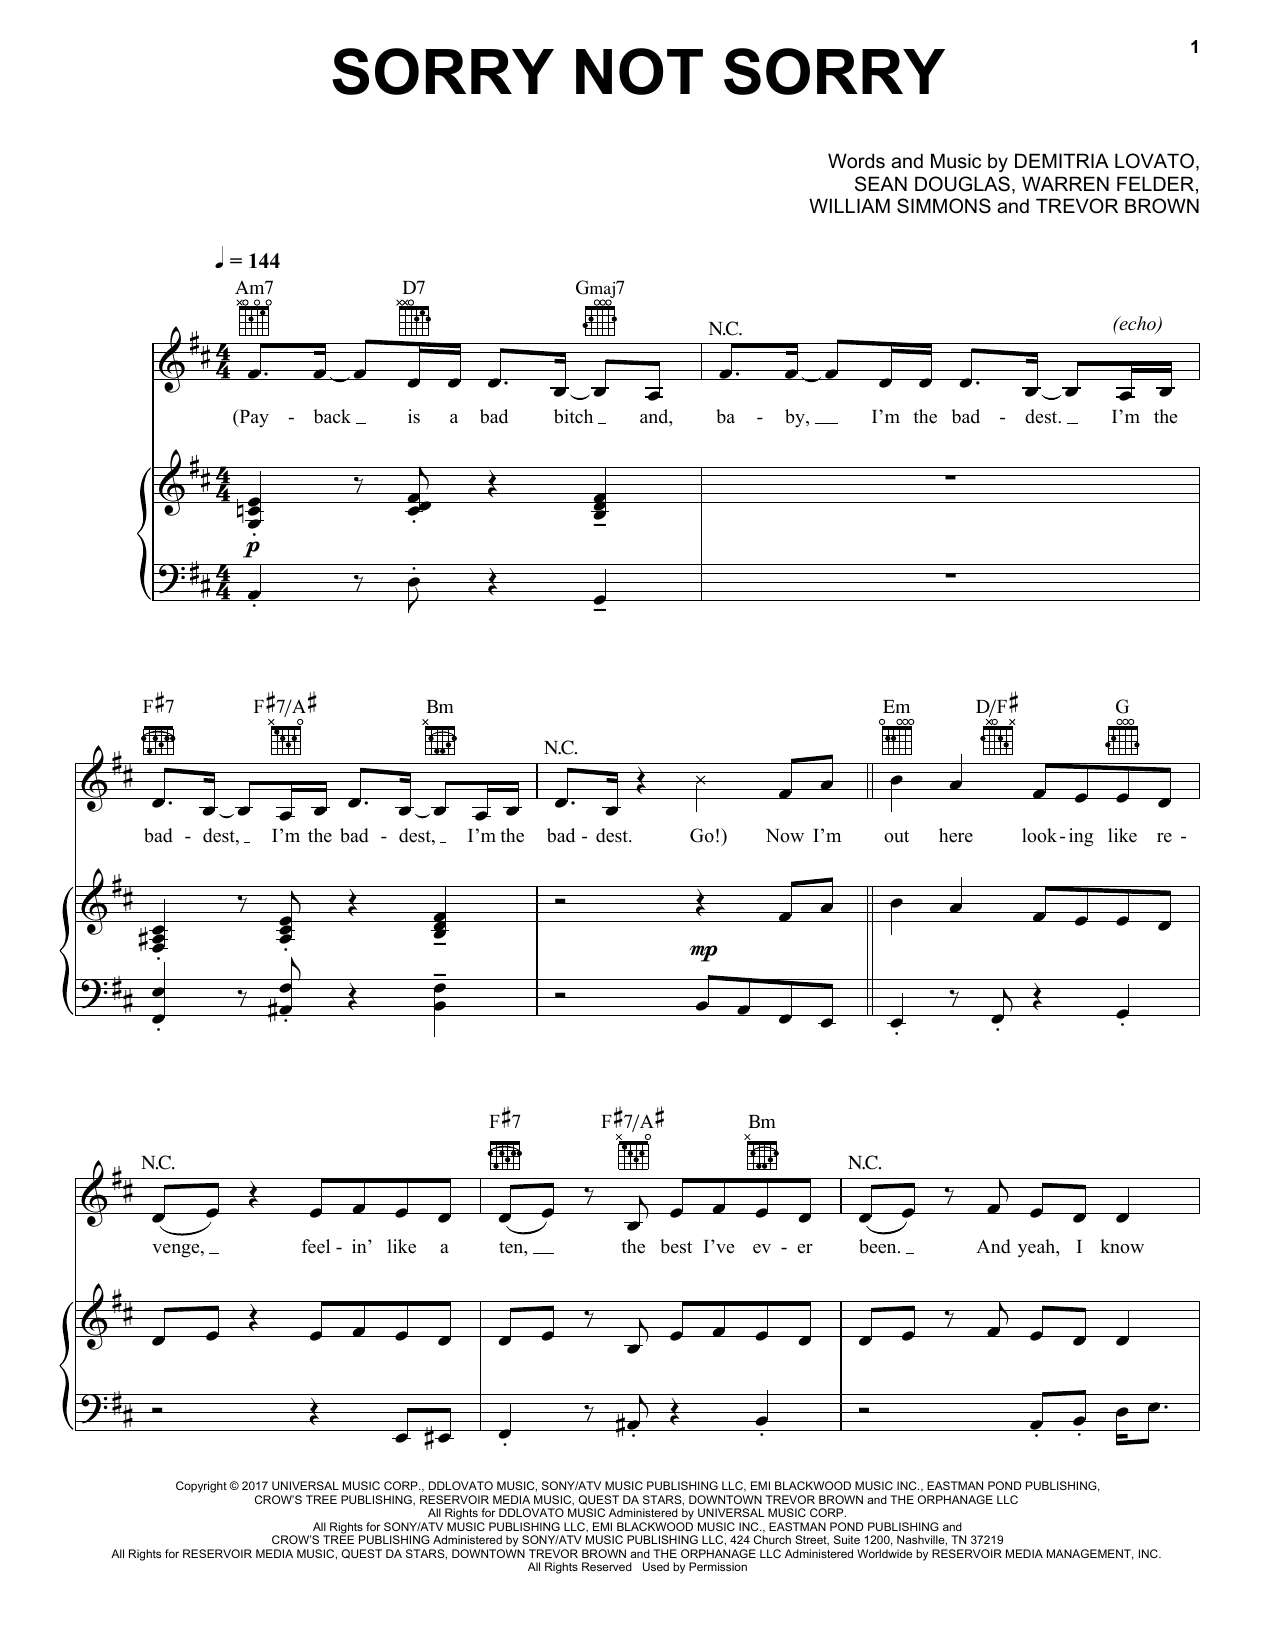 Download Demi Lovato Sorry Not Sorry Sheet Music